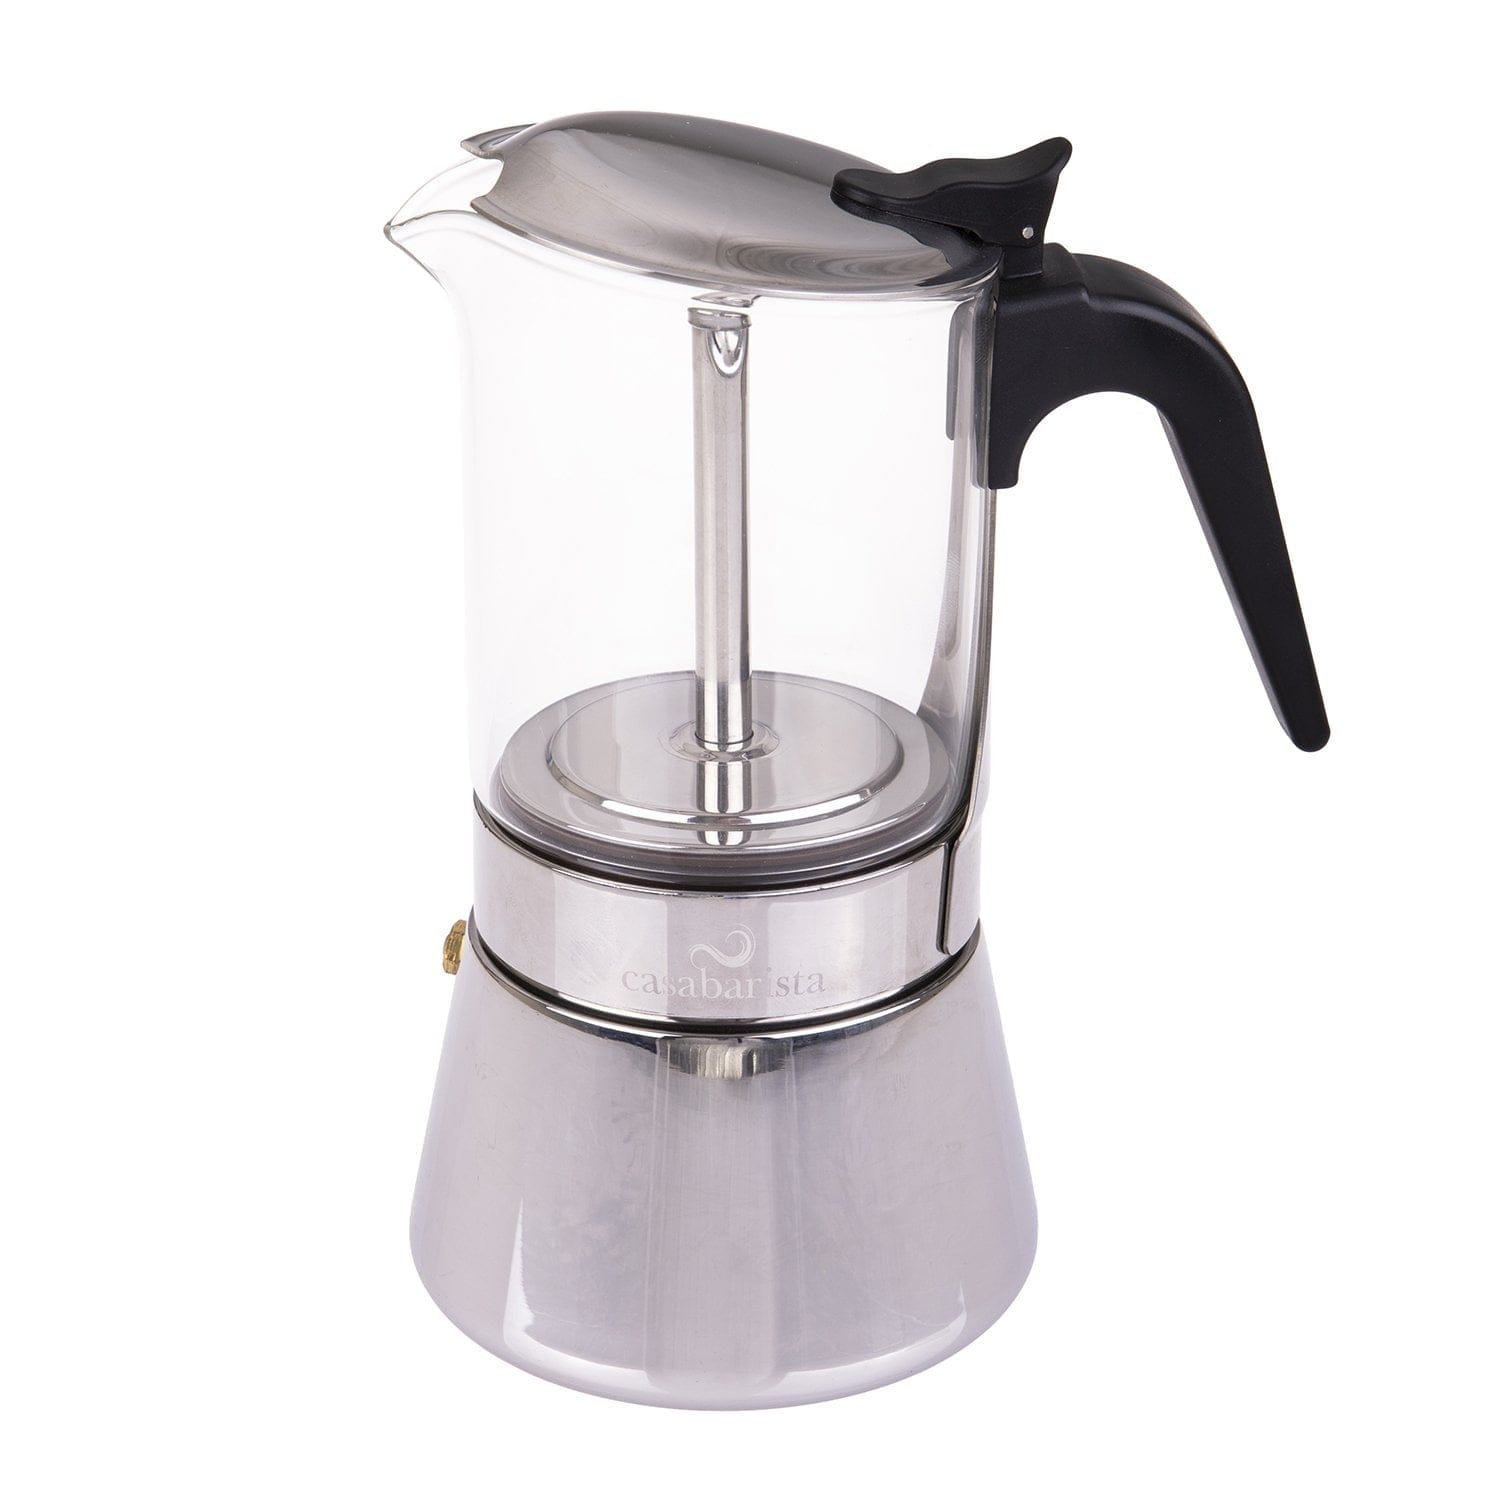 Fagor cupy cafetière expresso italienne induction aluminium 9